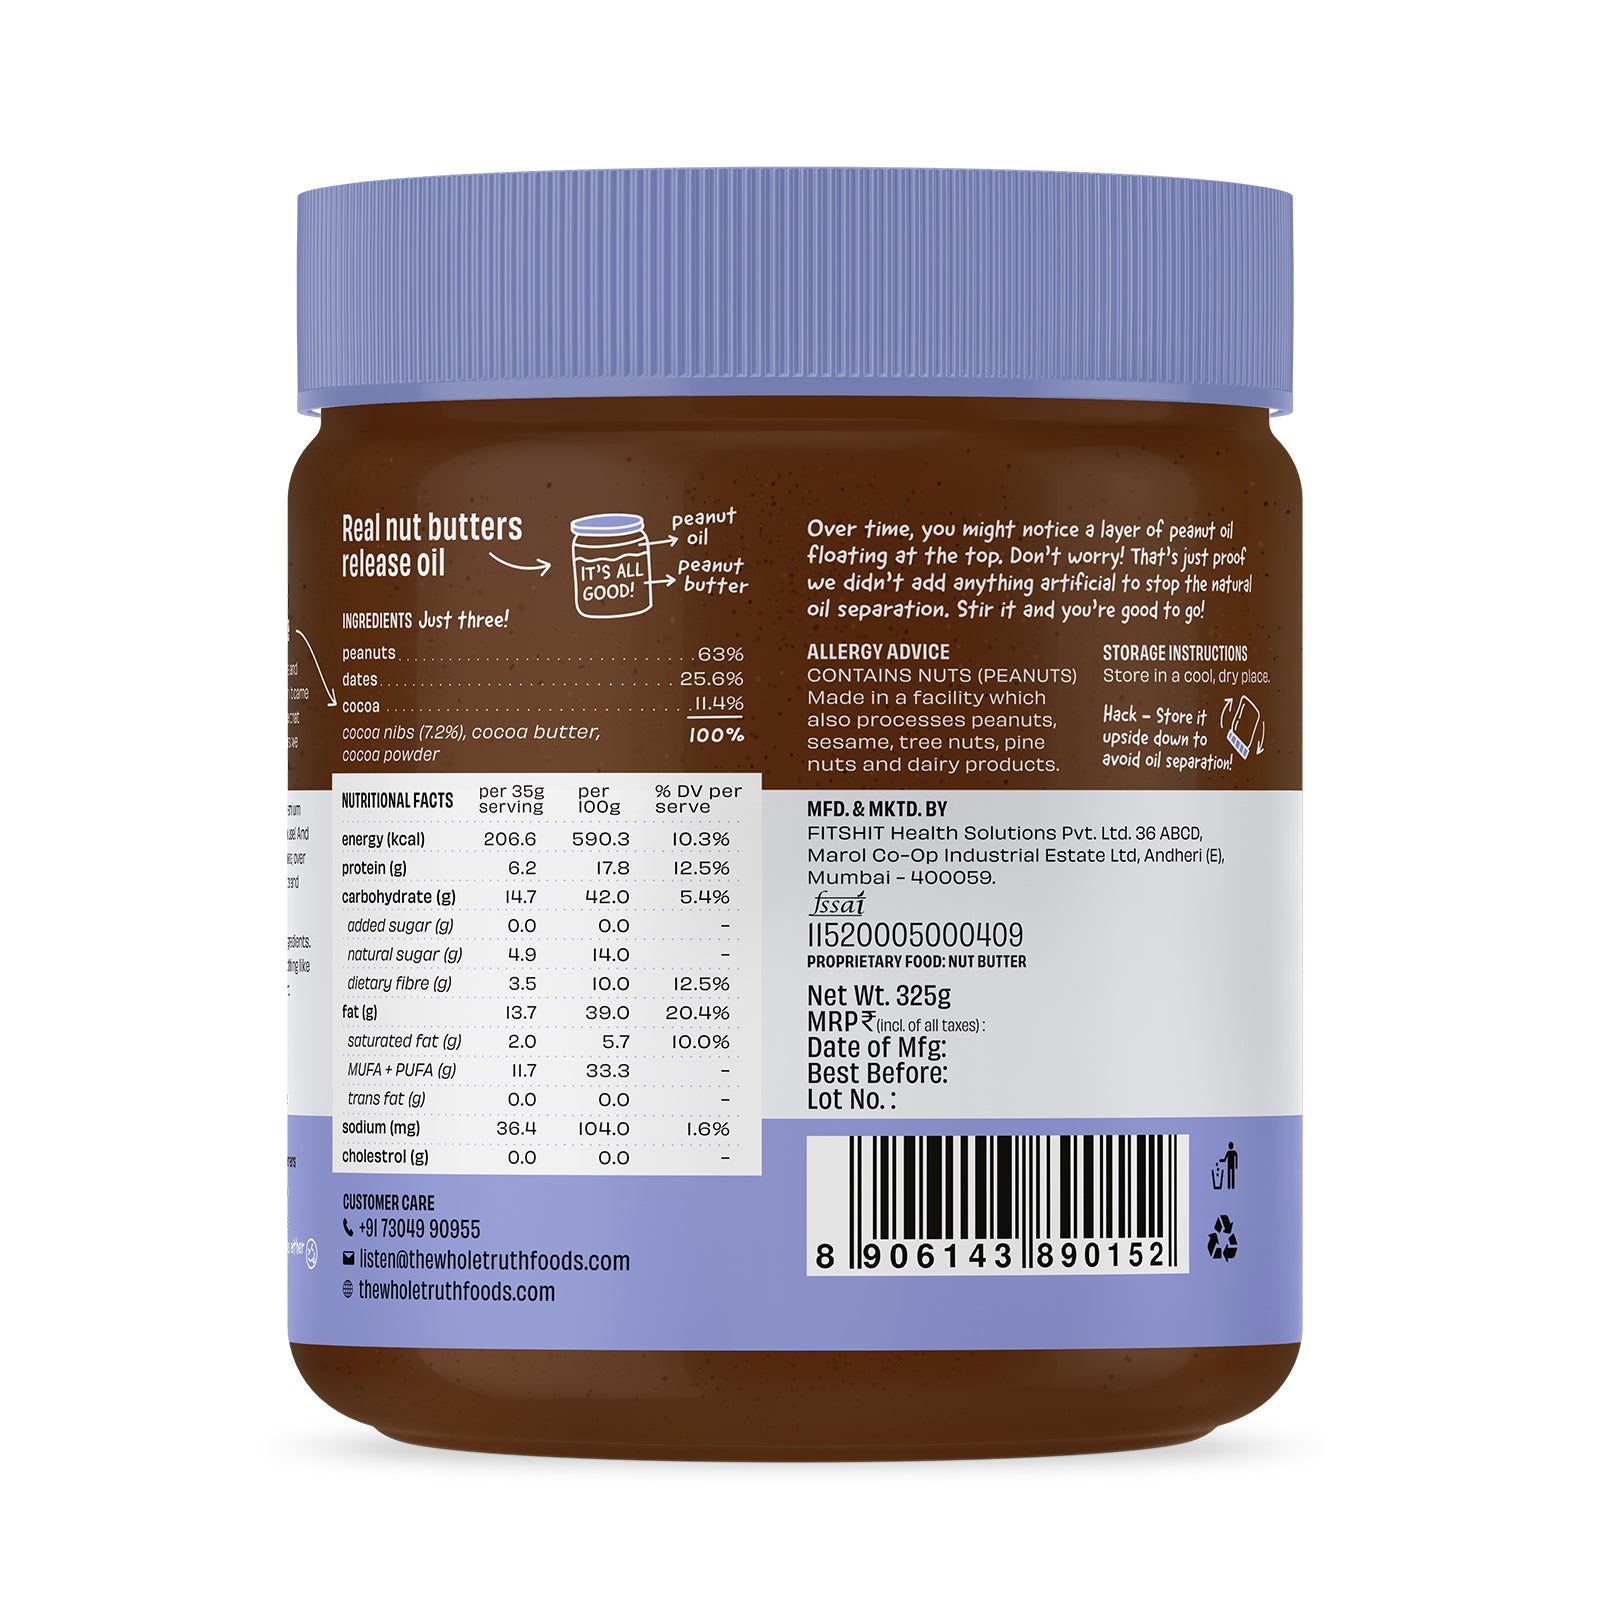 The Whole Truth - Dark Chocolate Peanut Butter - Crunchy | No Added Sugar | High Protein | No Artificial Sweeteners | No Palm Oil | Vegan | Gluten Free | No Preservatives | 100% Natural